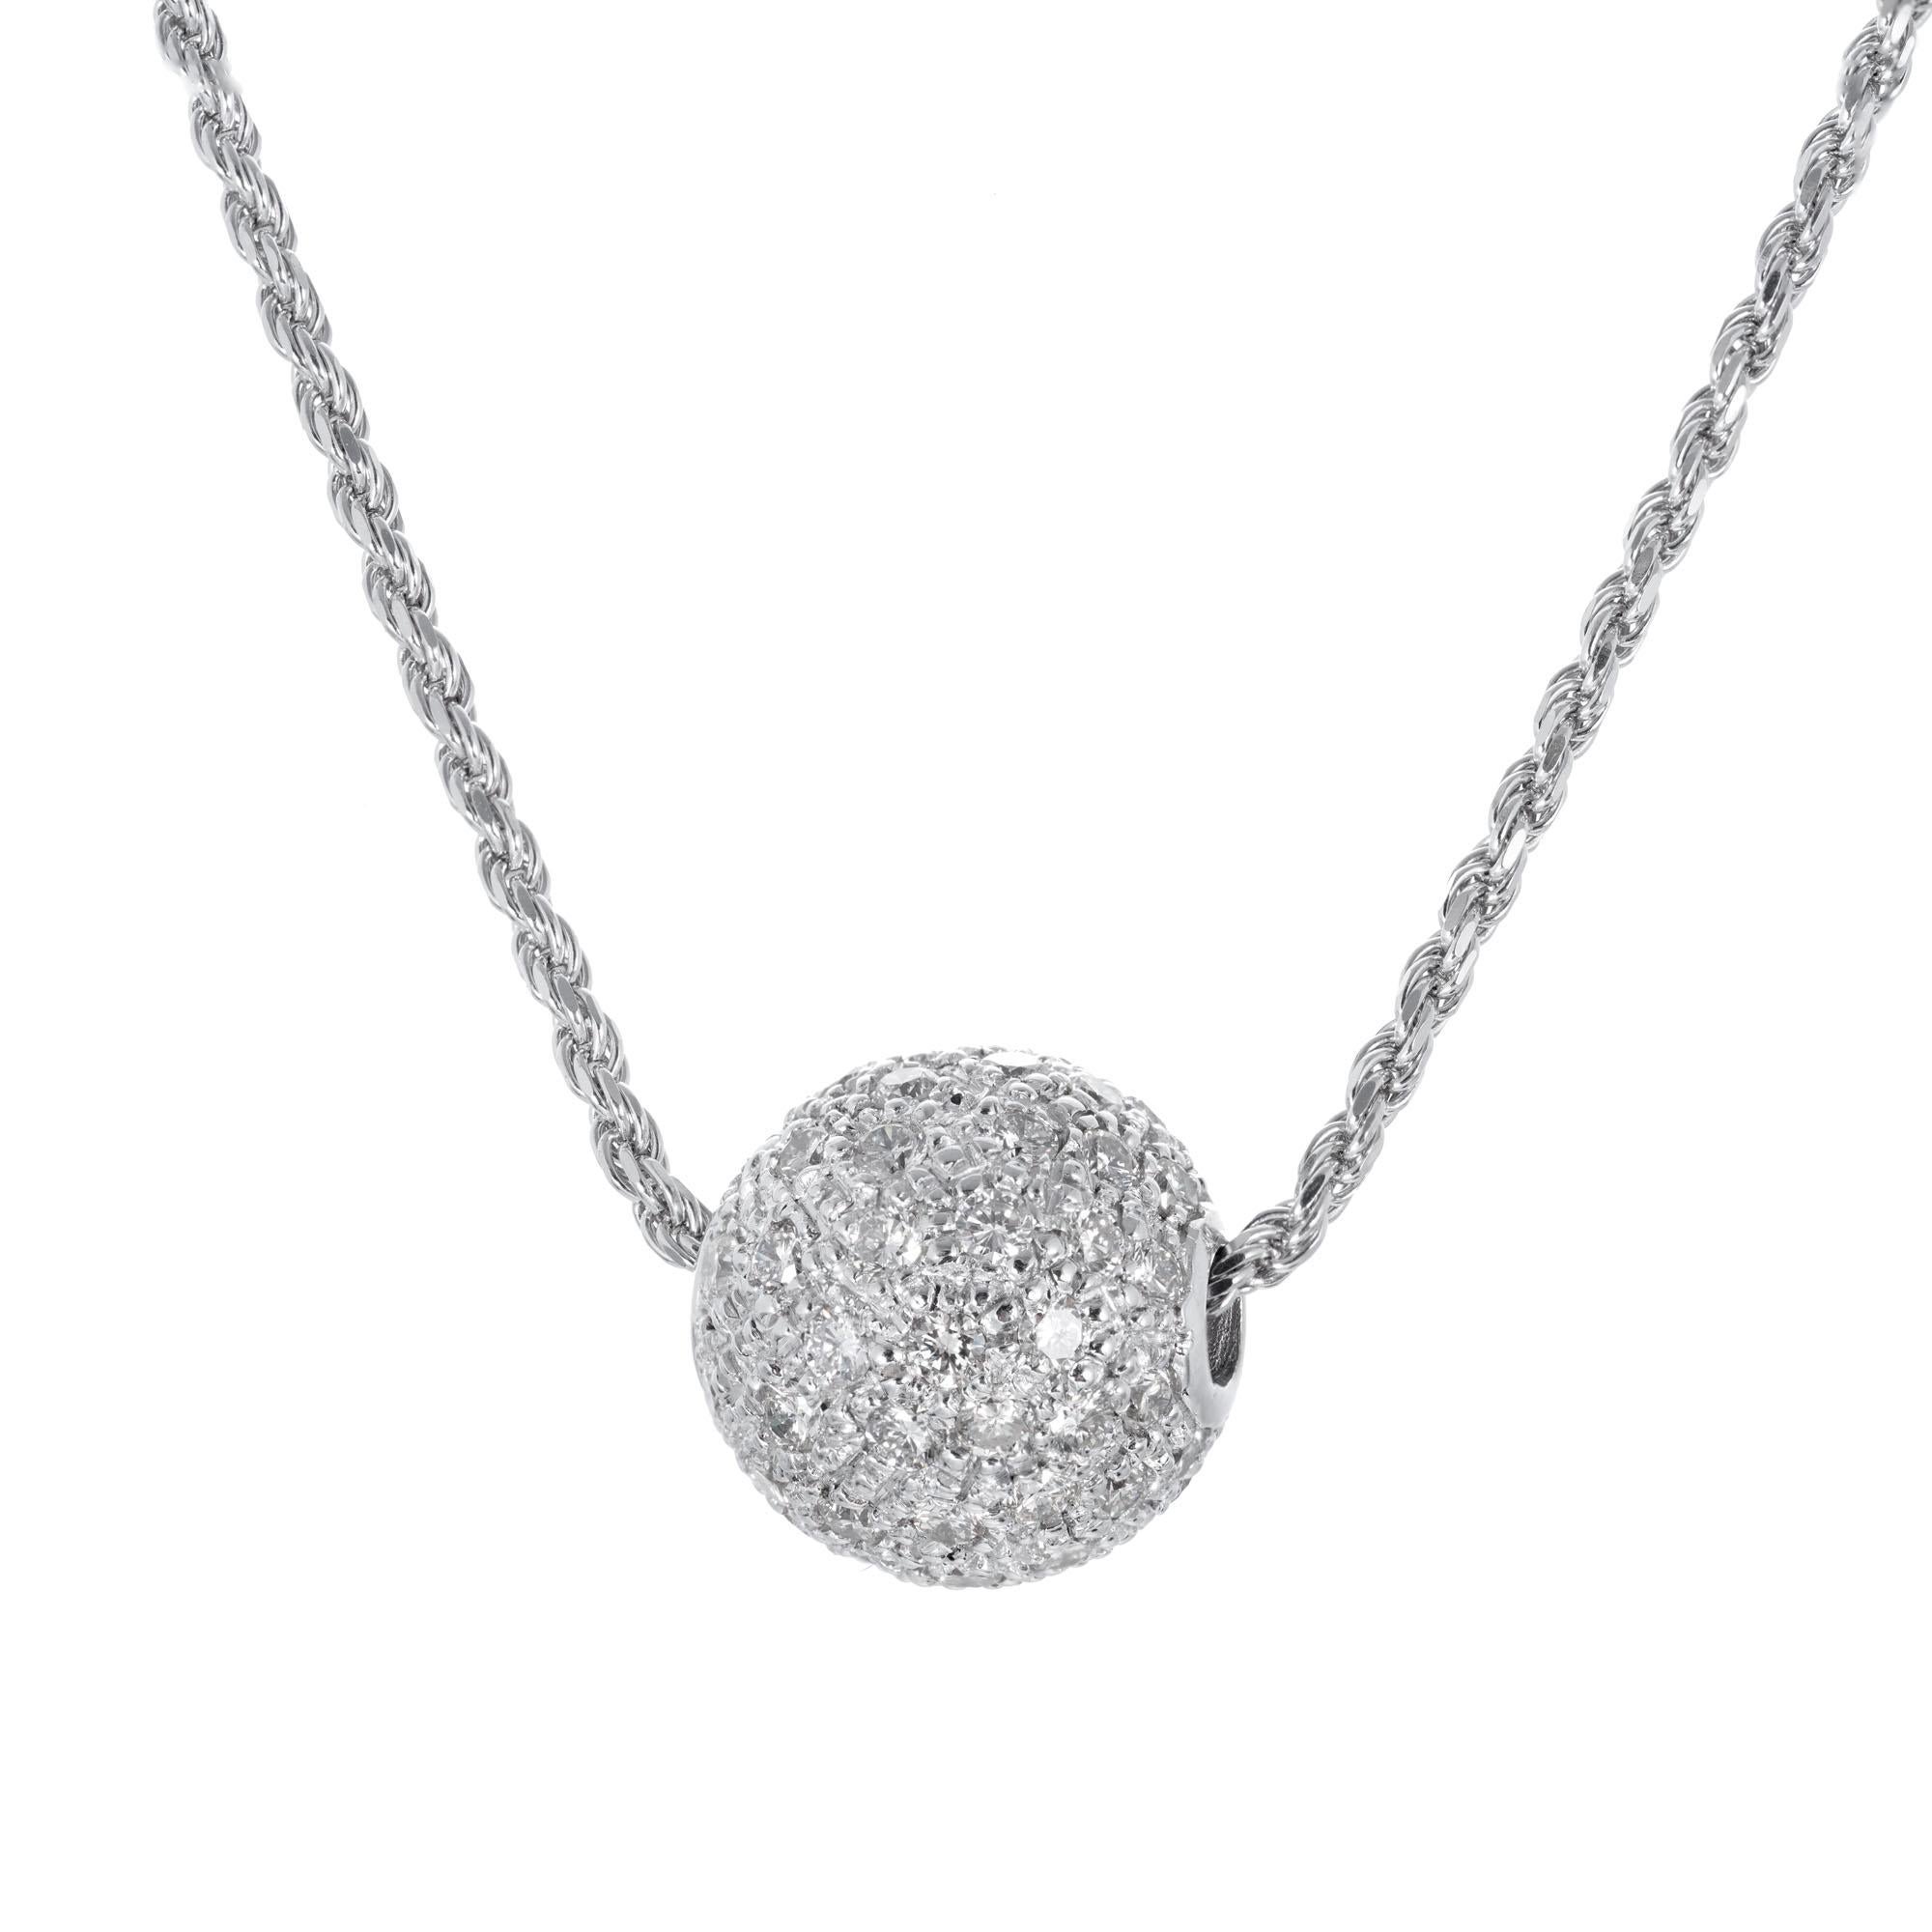 Diamond pave ball necklace. 30 Inch rope chain in 14k white gold with a 15mm white gold pave ball with 1.60 carat of white full cut diamonds.

73 round brilliant cut diamonds G VS, approx. 1.60ct 
14k white gold 
Stamped: 14k
16.5 grams
Top to